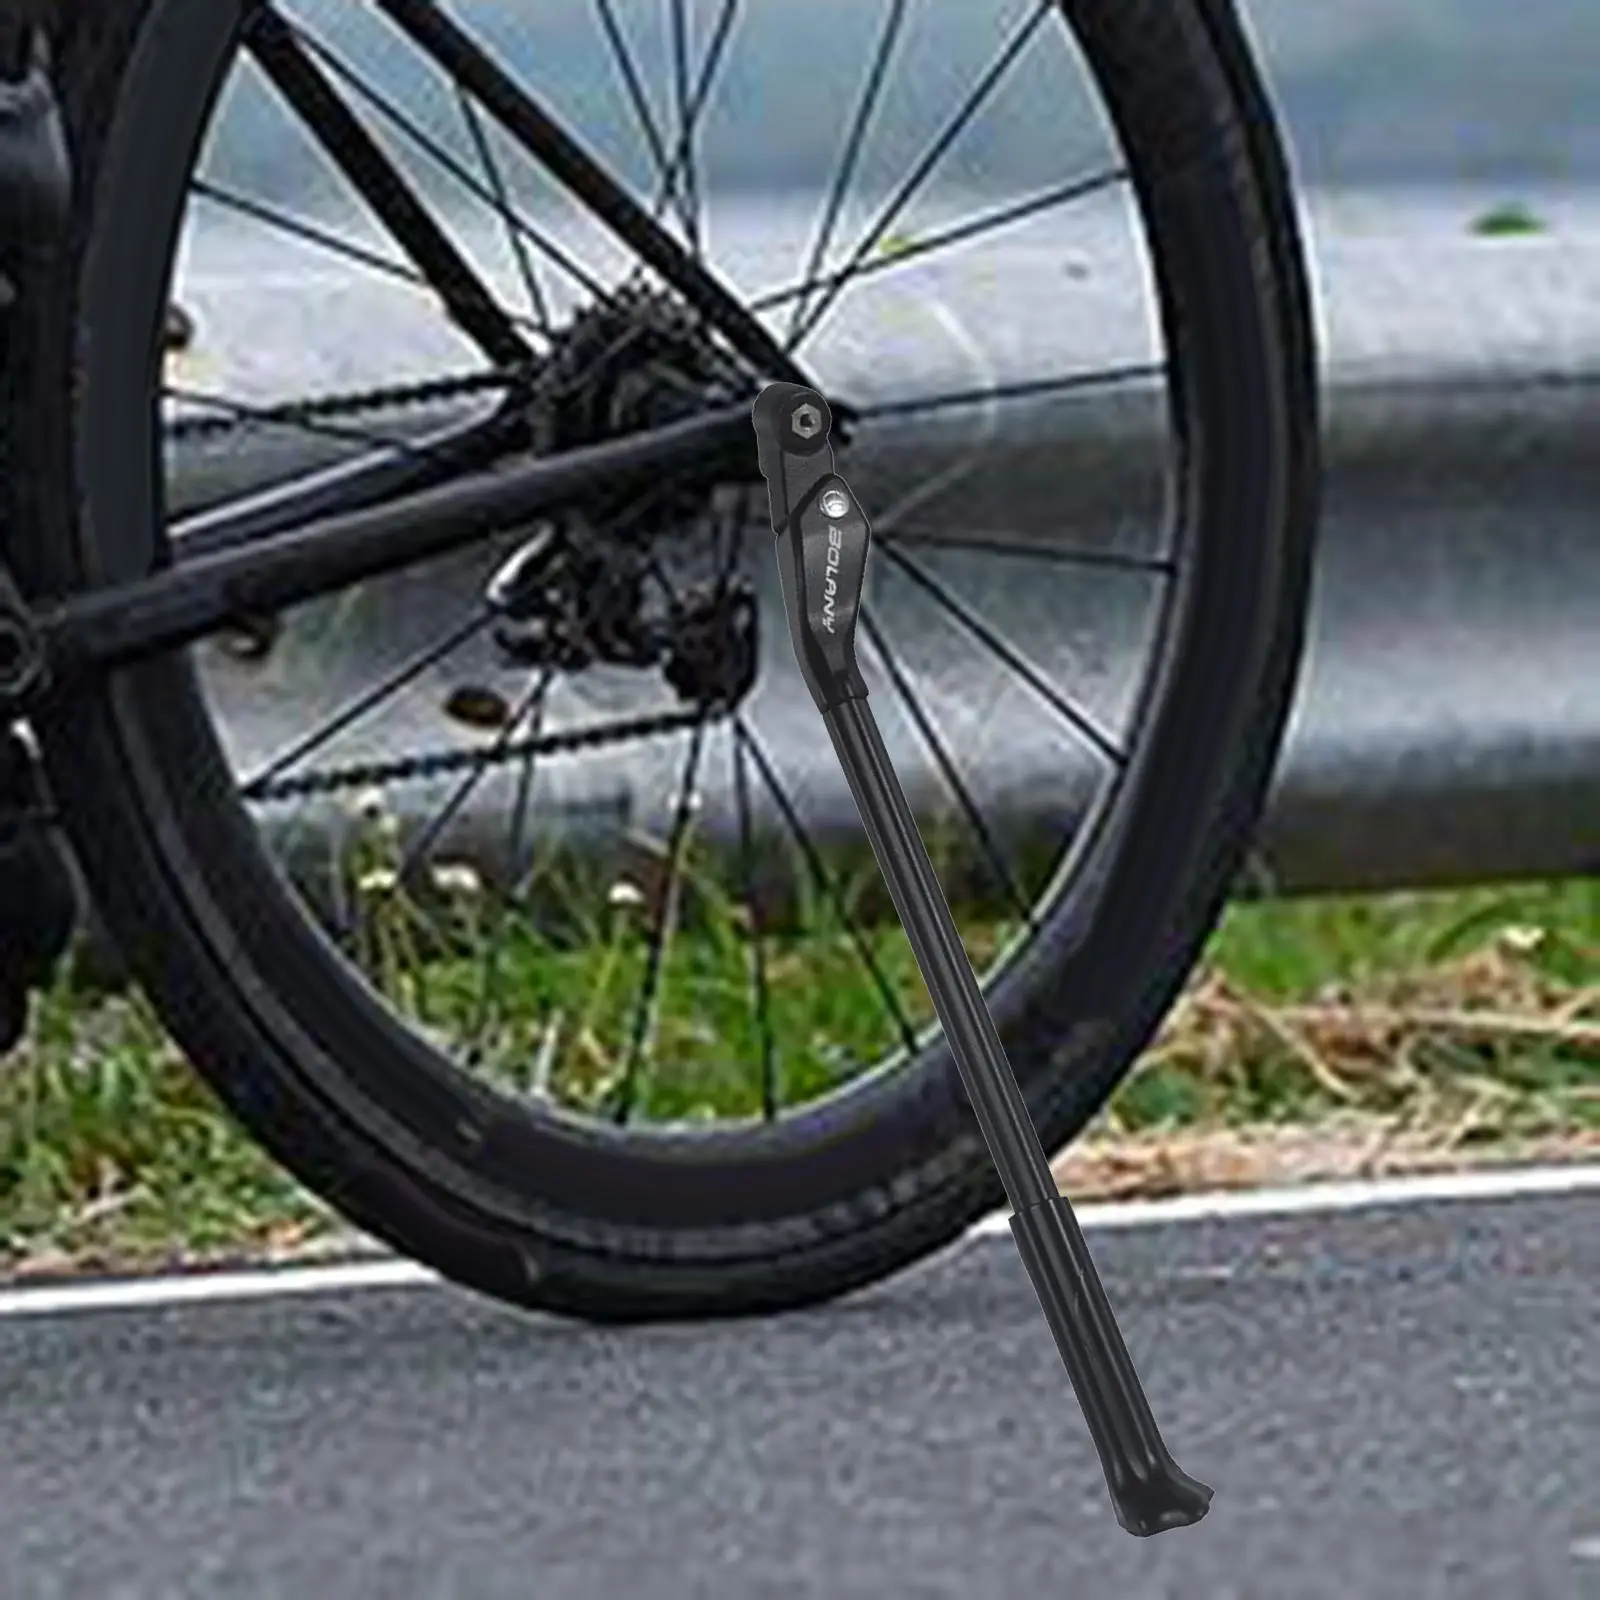 Bike Kickstand, Bicycle Kick Stand, Durable Stable Support Parking Stand for